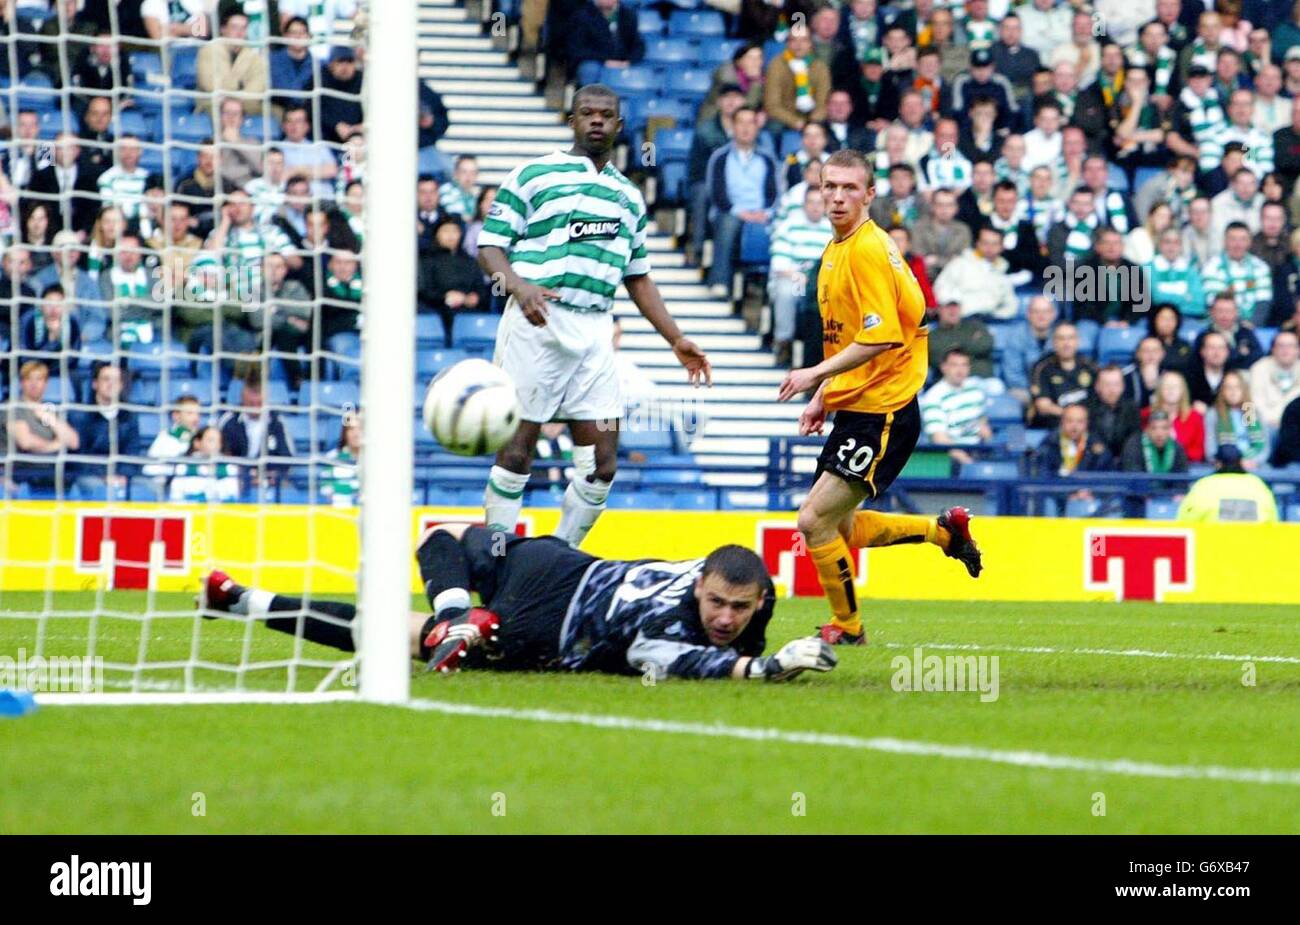 Colin McMenamin scores for Livingston FC against Celtic during the Tennent's Scottish Cup semi-final at Hampden Park, Glasgow. Stock Photo